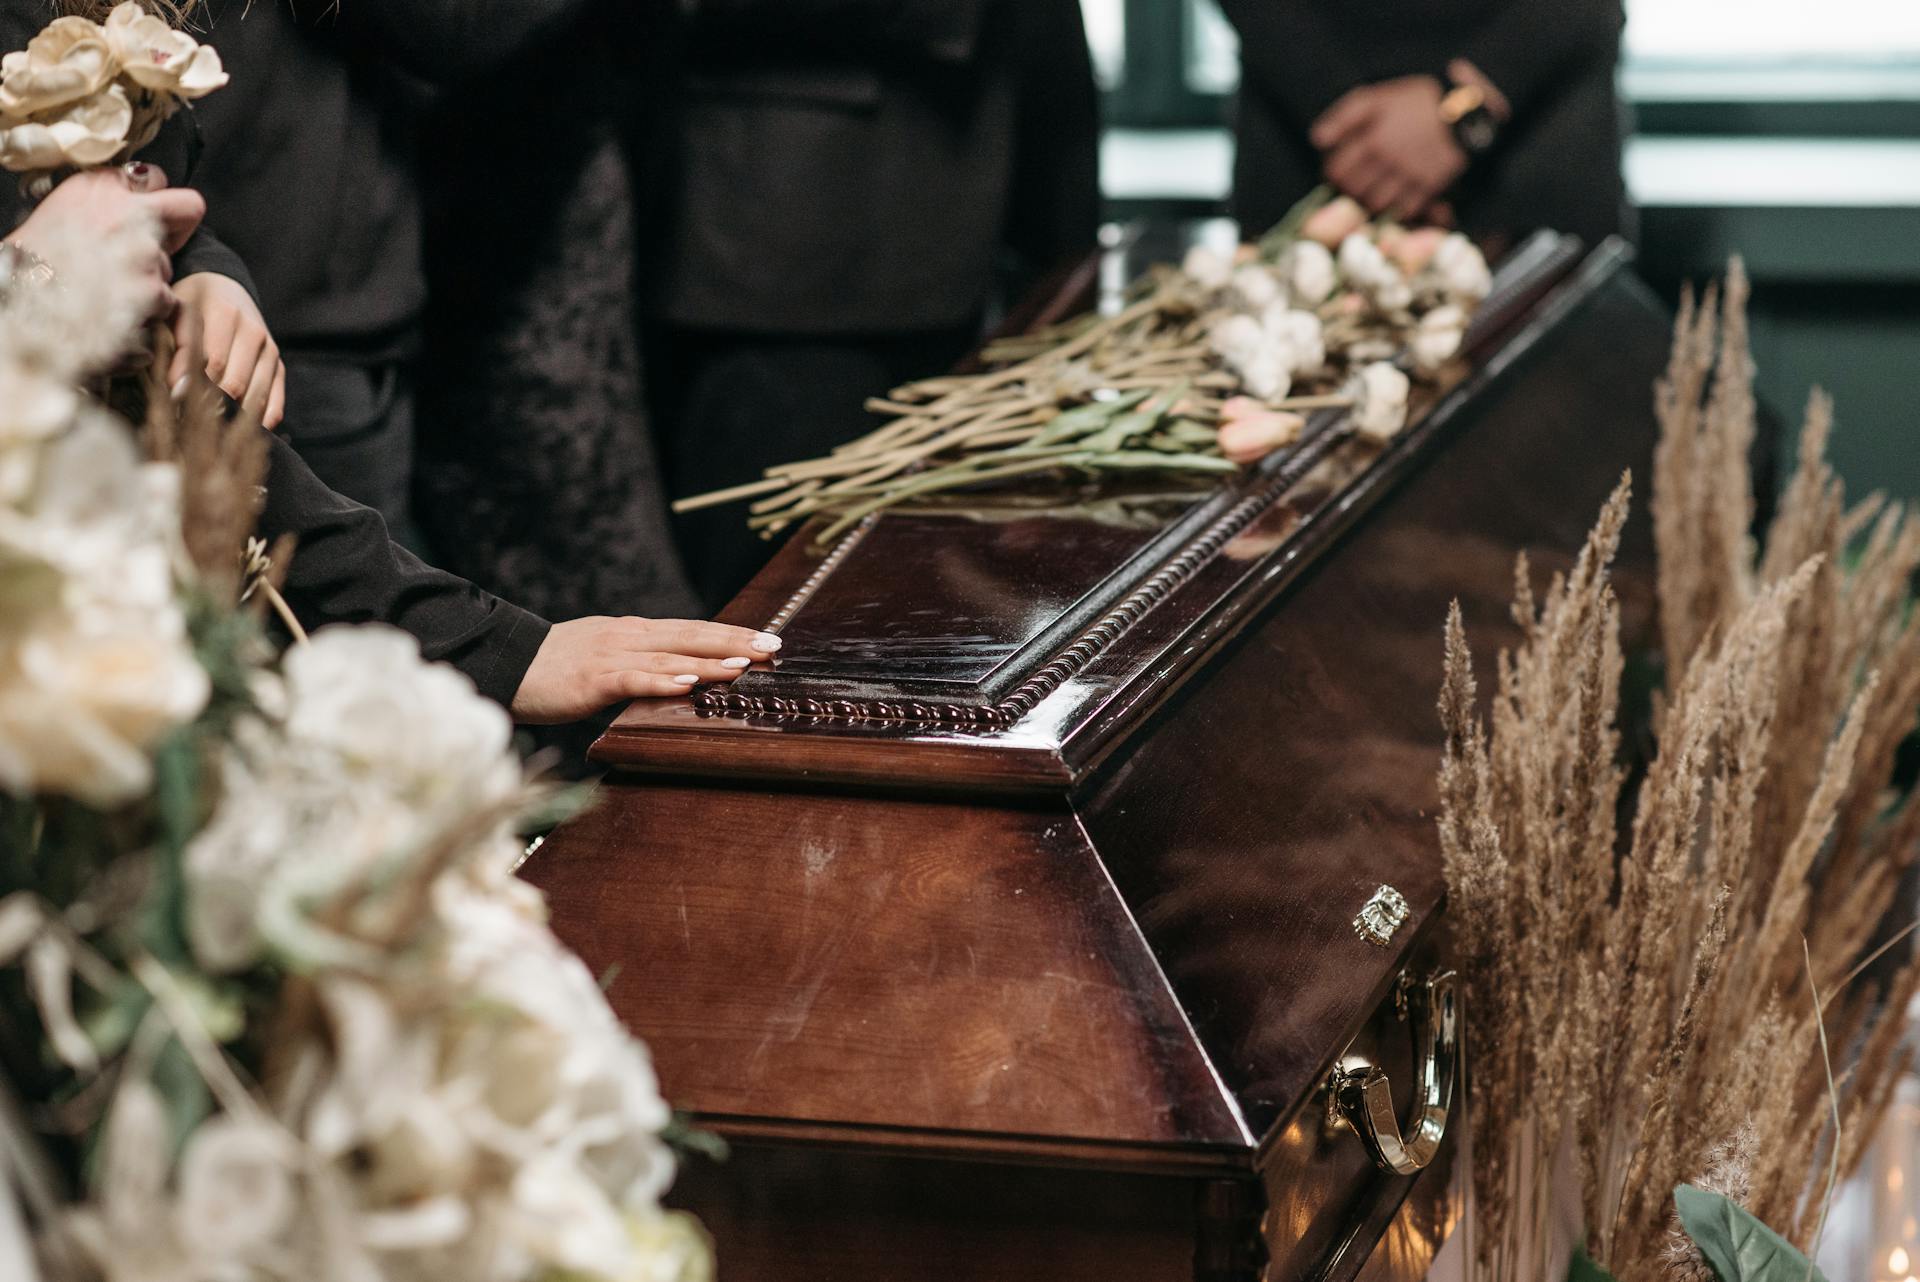 A person holding a coffin | Source: Pexels